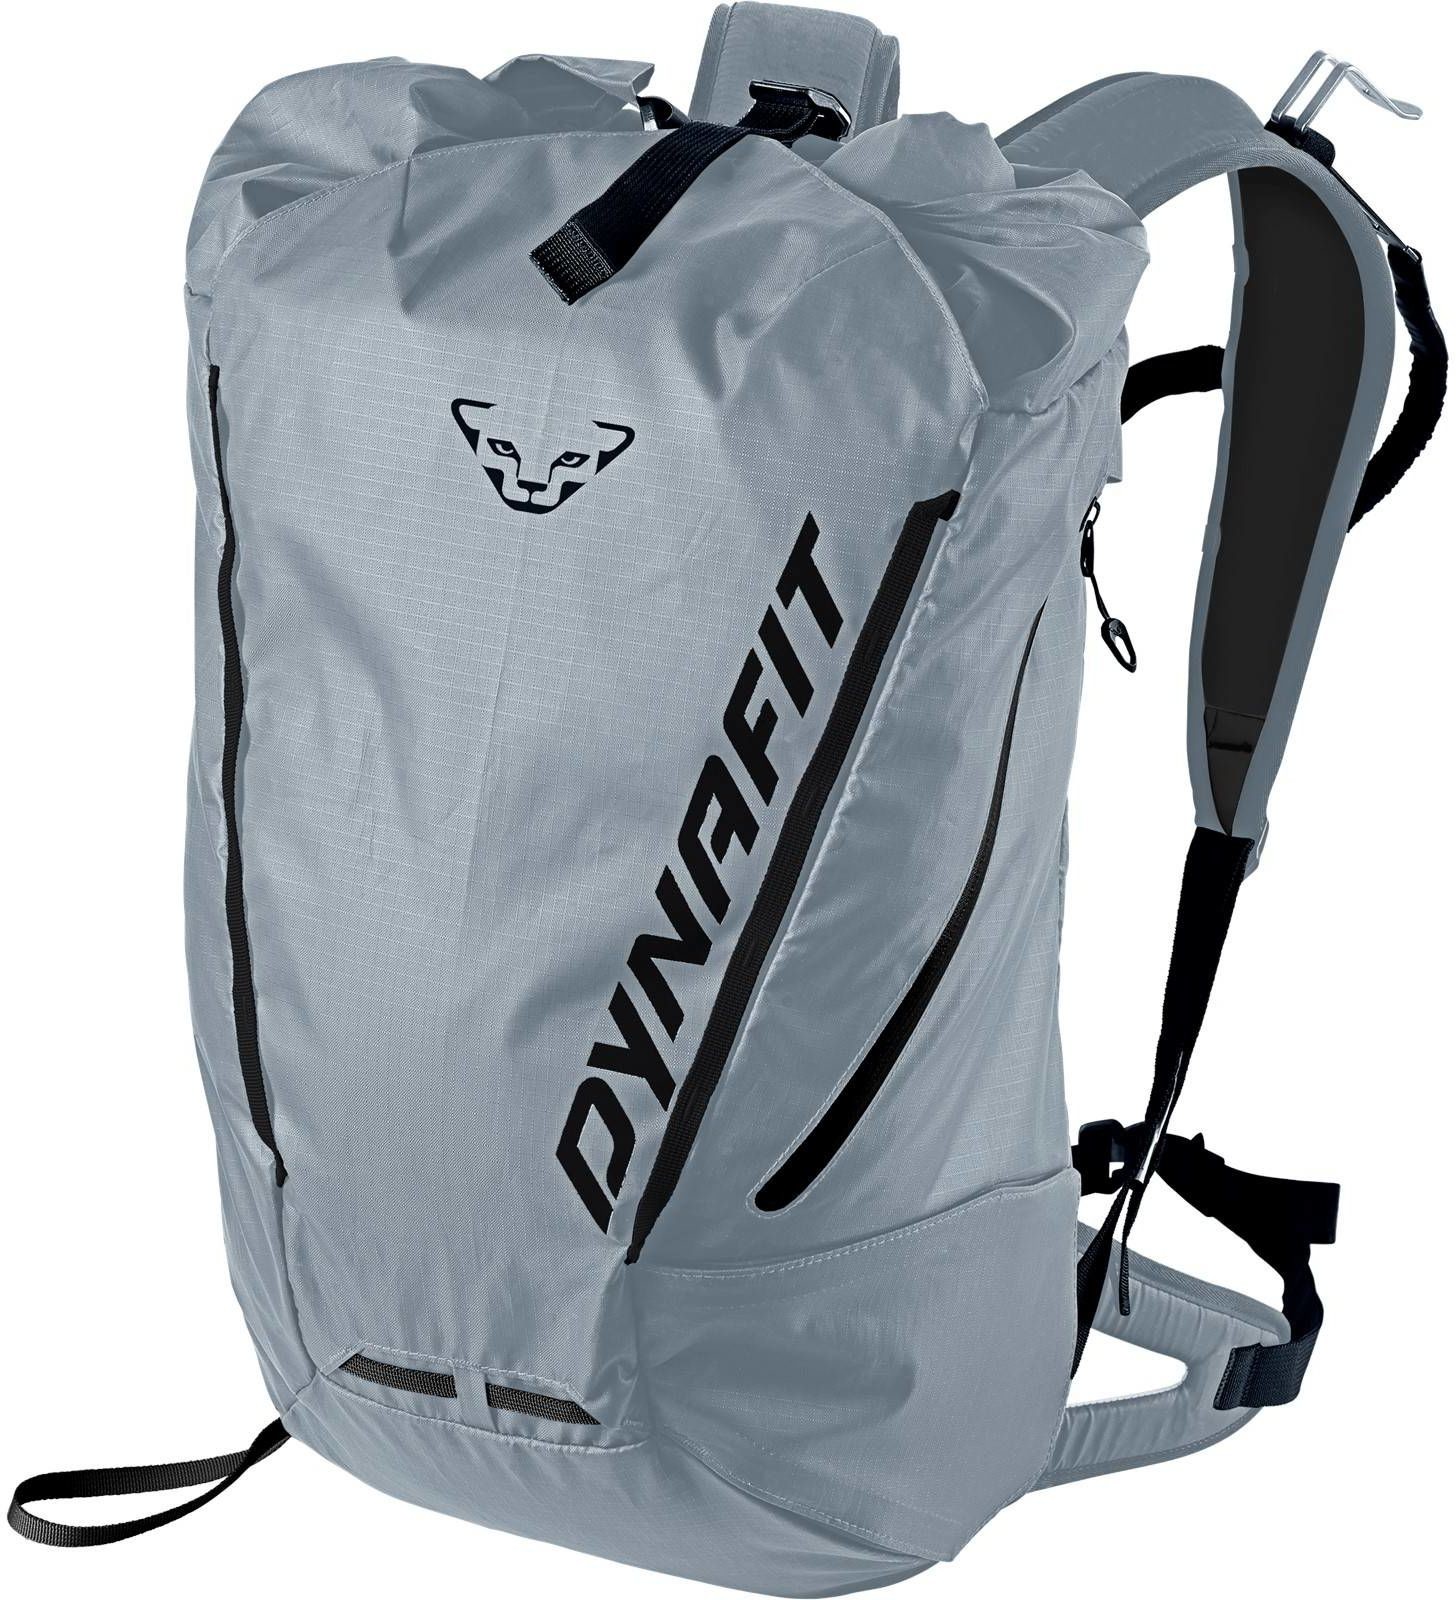 DYNAFIT Plecak Skiturowy Expedition 30 - alloy / black out 08-0000048953-0935